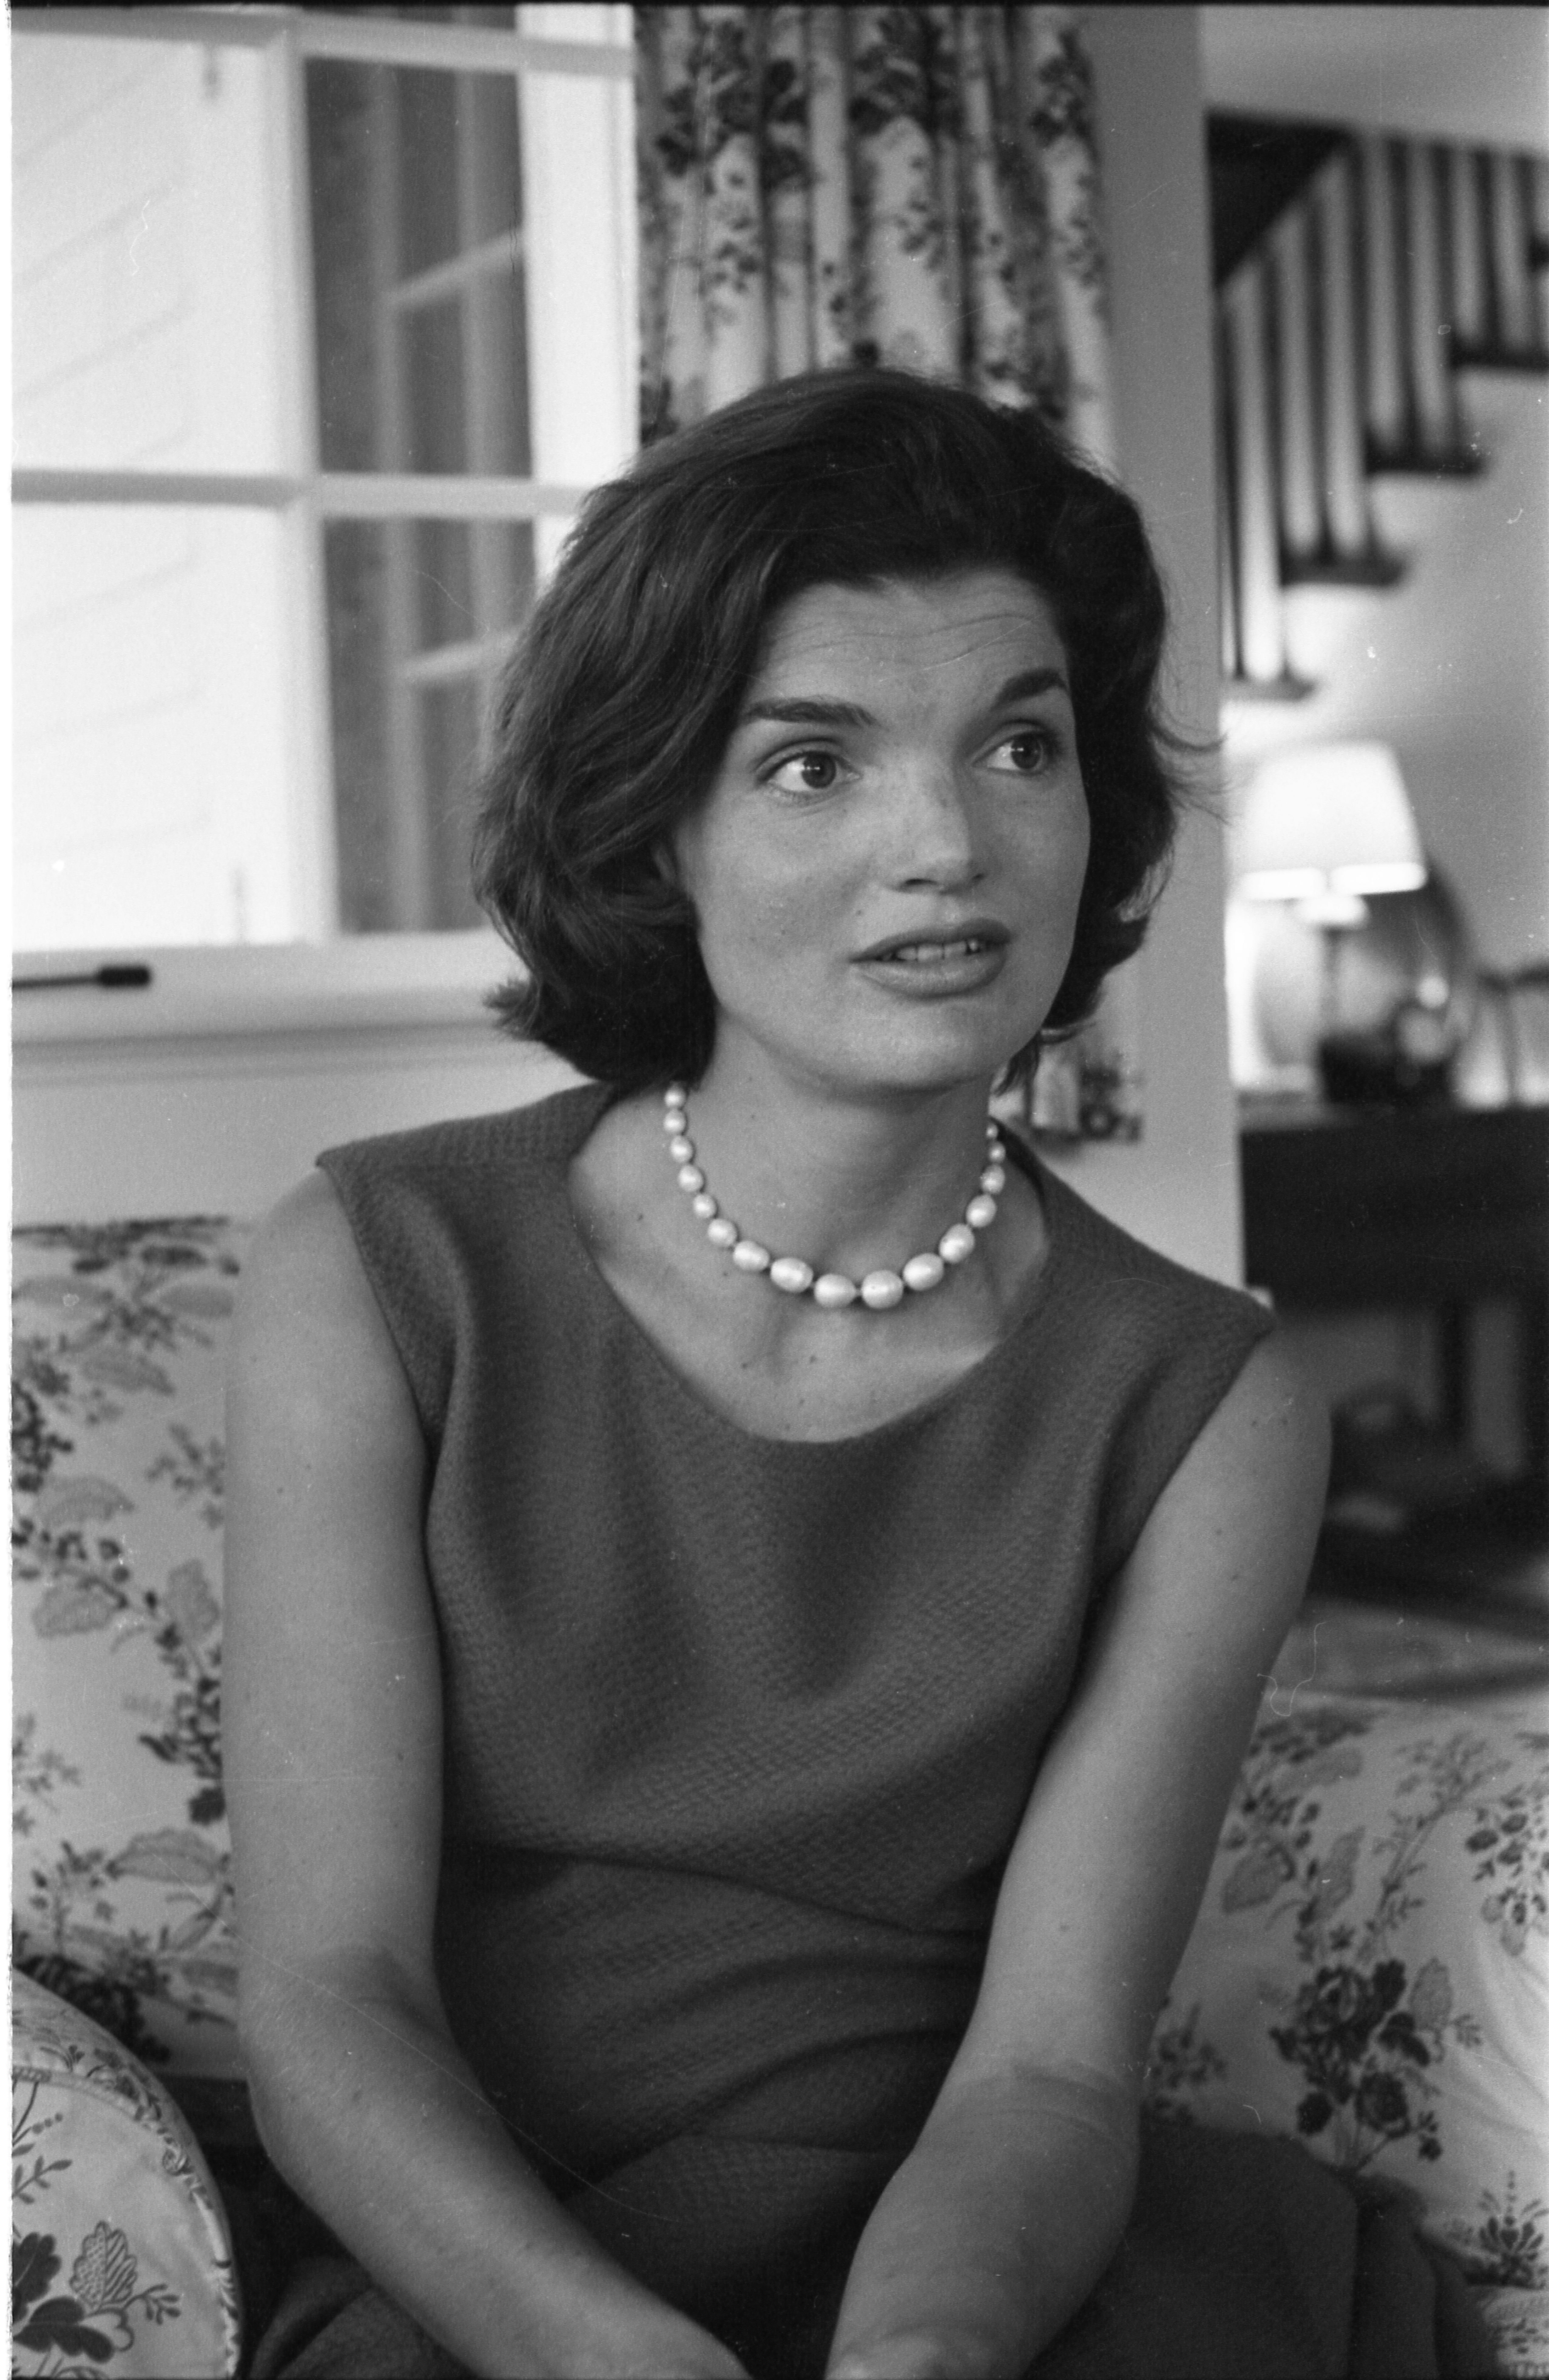 Jackie Kennedy at her home in Hyannis Port, Massachusetts, circa 1960. | Source: Alfred Eisenstaedt/Time & Life Pictures/Getty Images